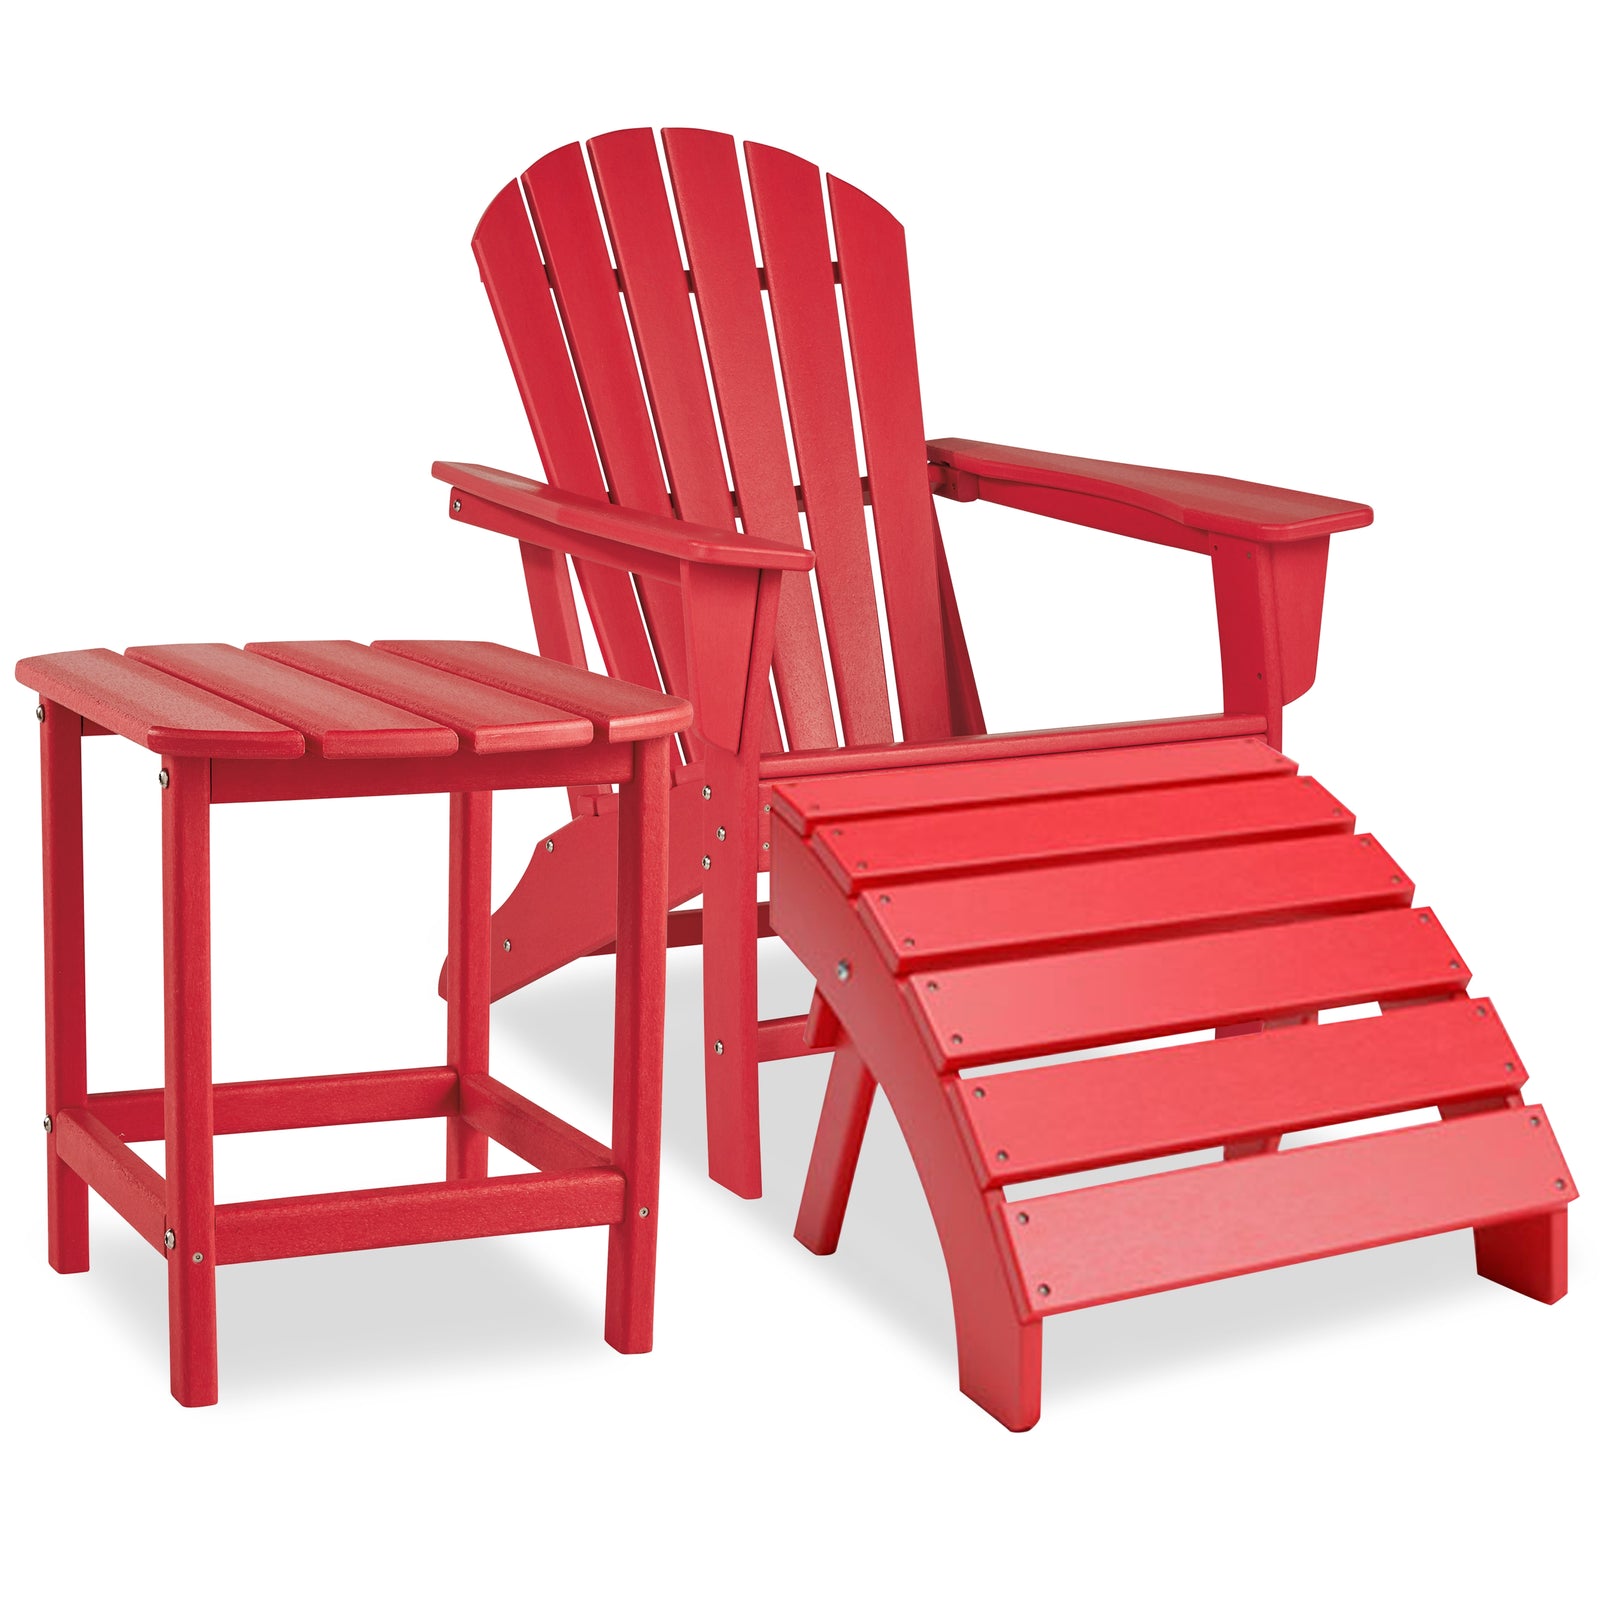 Sundown Red Treasure Outdoor Adirondack Chair And Ottoman With Side Table